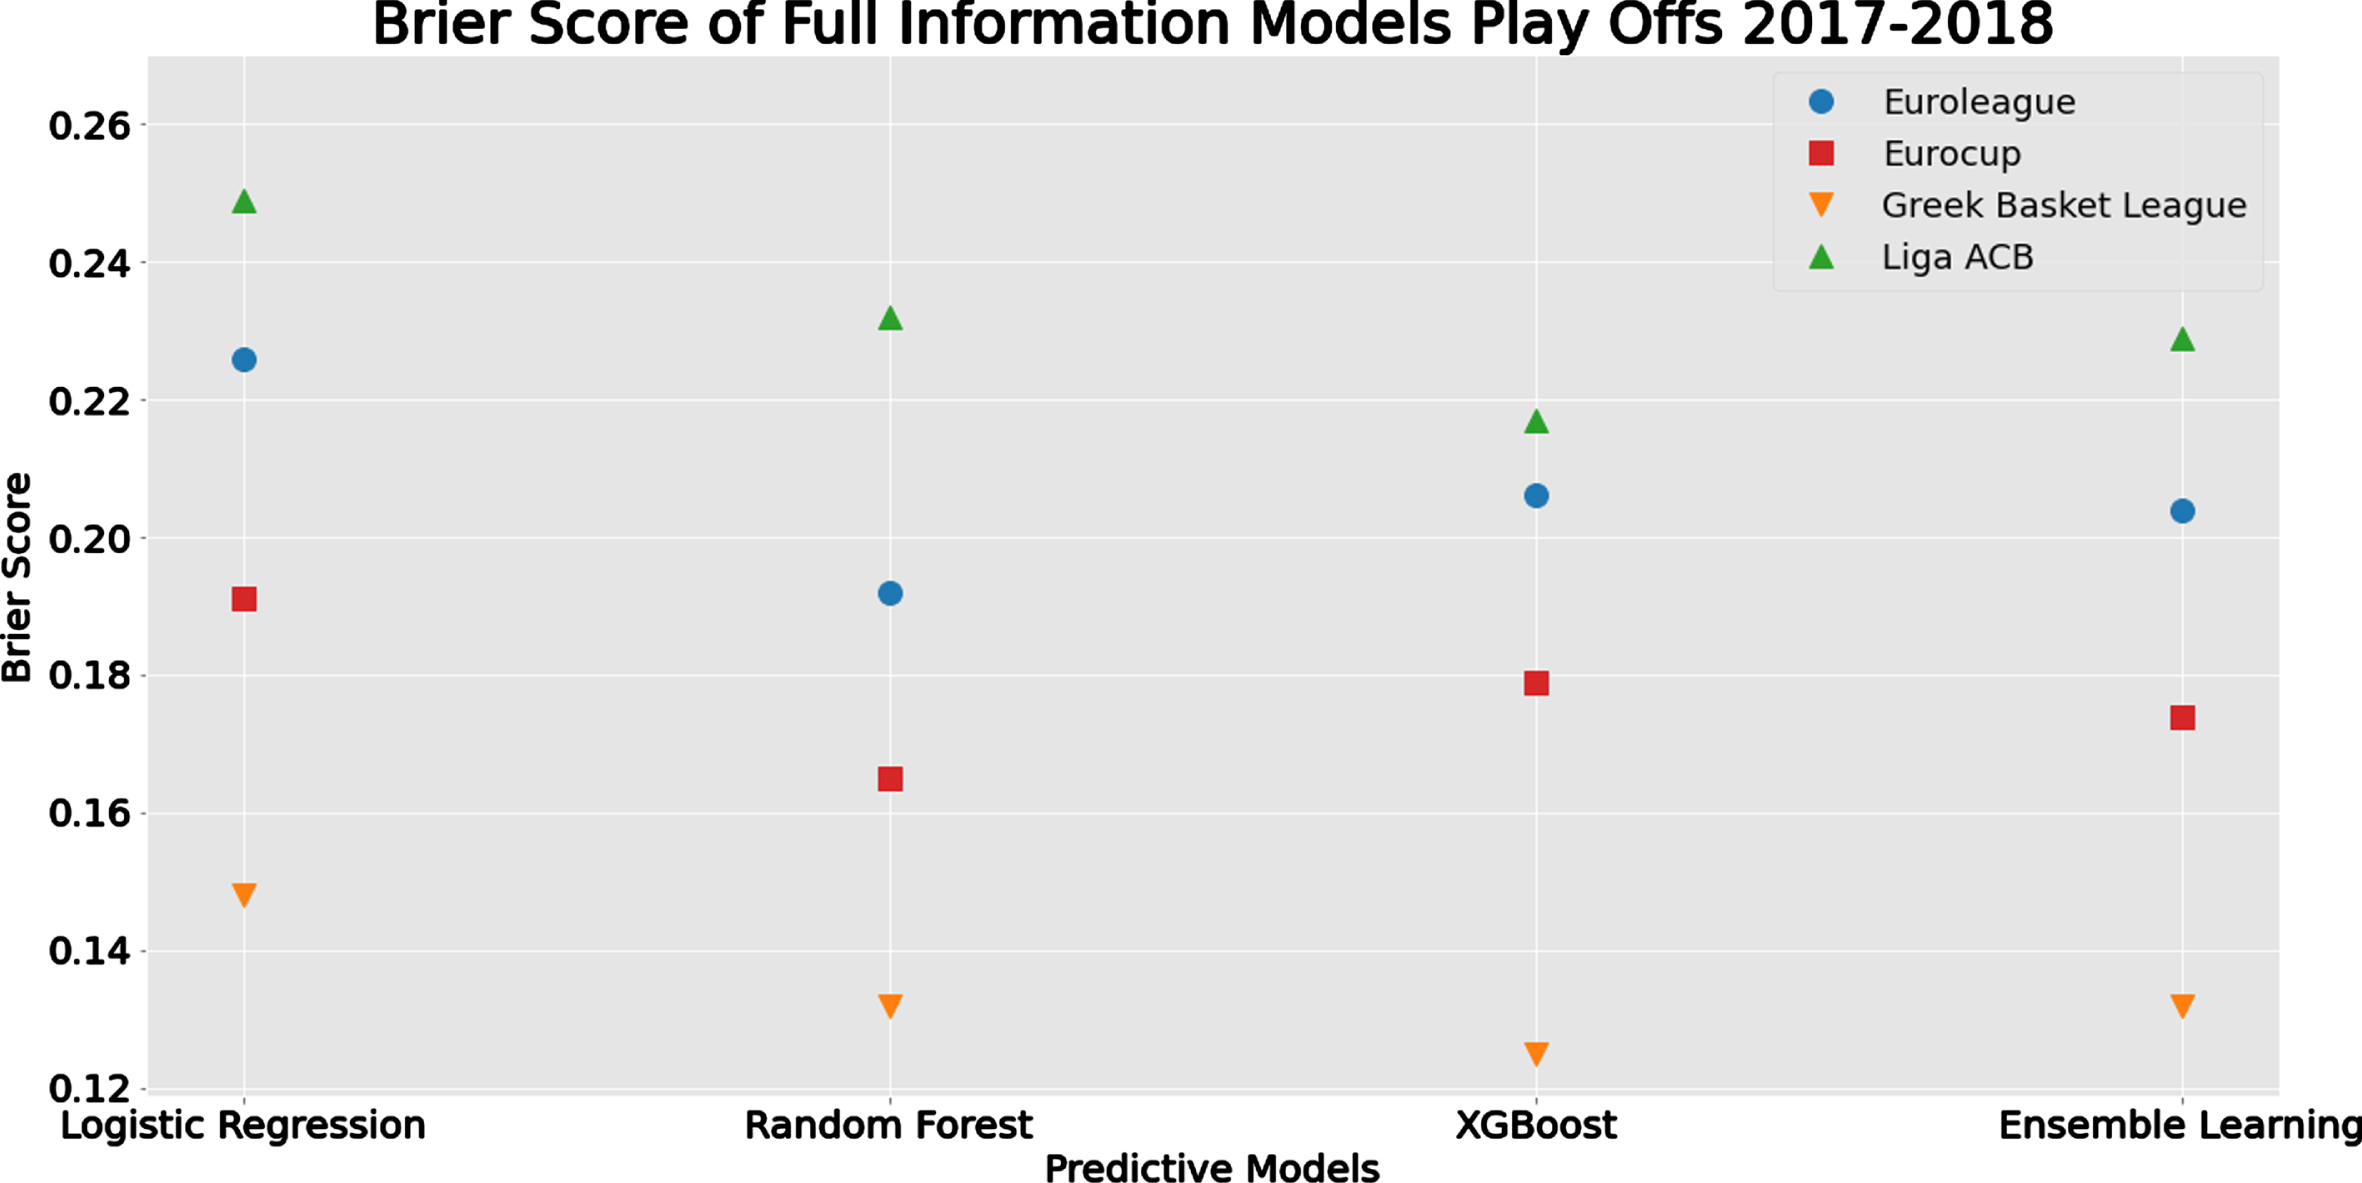 Comparison of Brier Score for Full Information Models for each tournament for the play-offs prediction scenario.